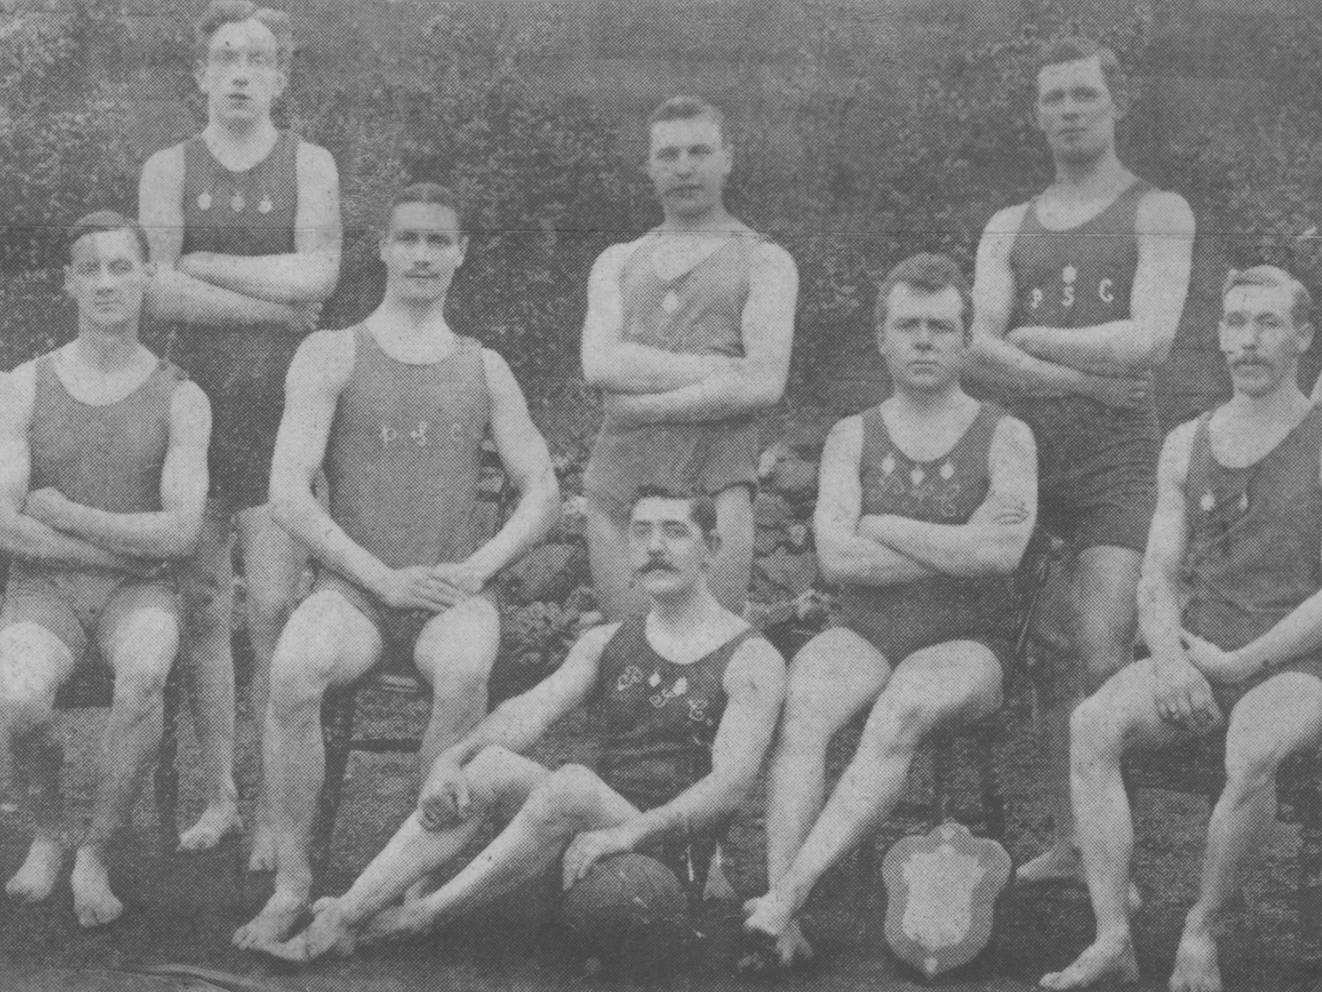 Pontefract's water polo team of 1909